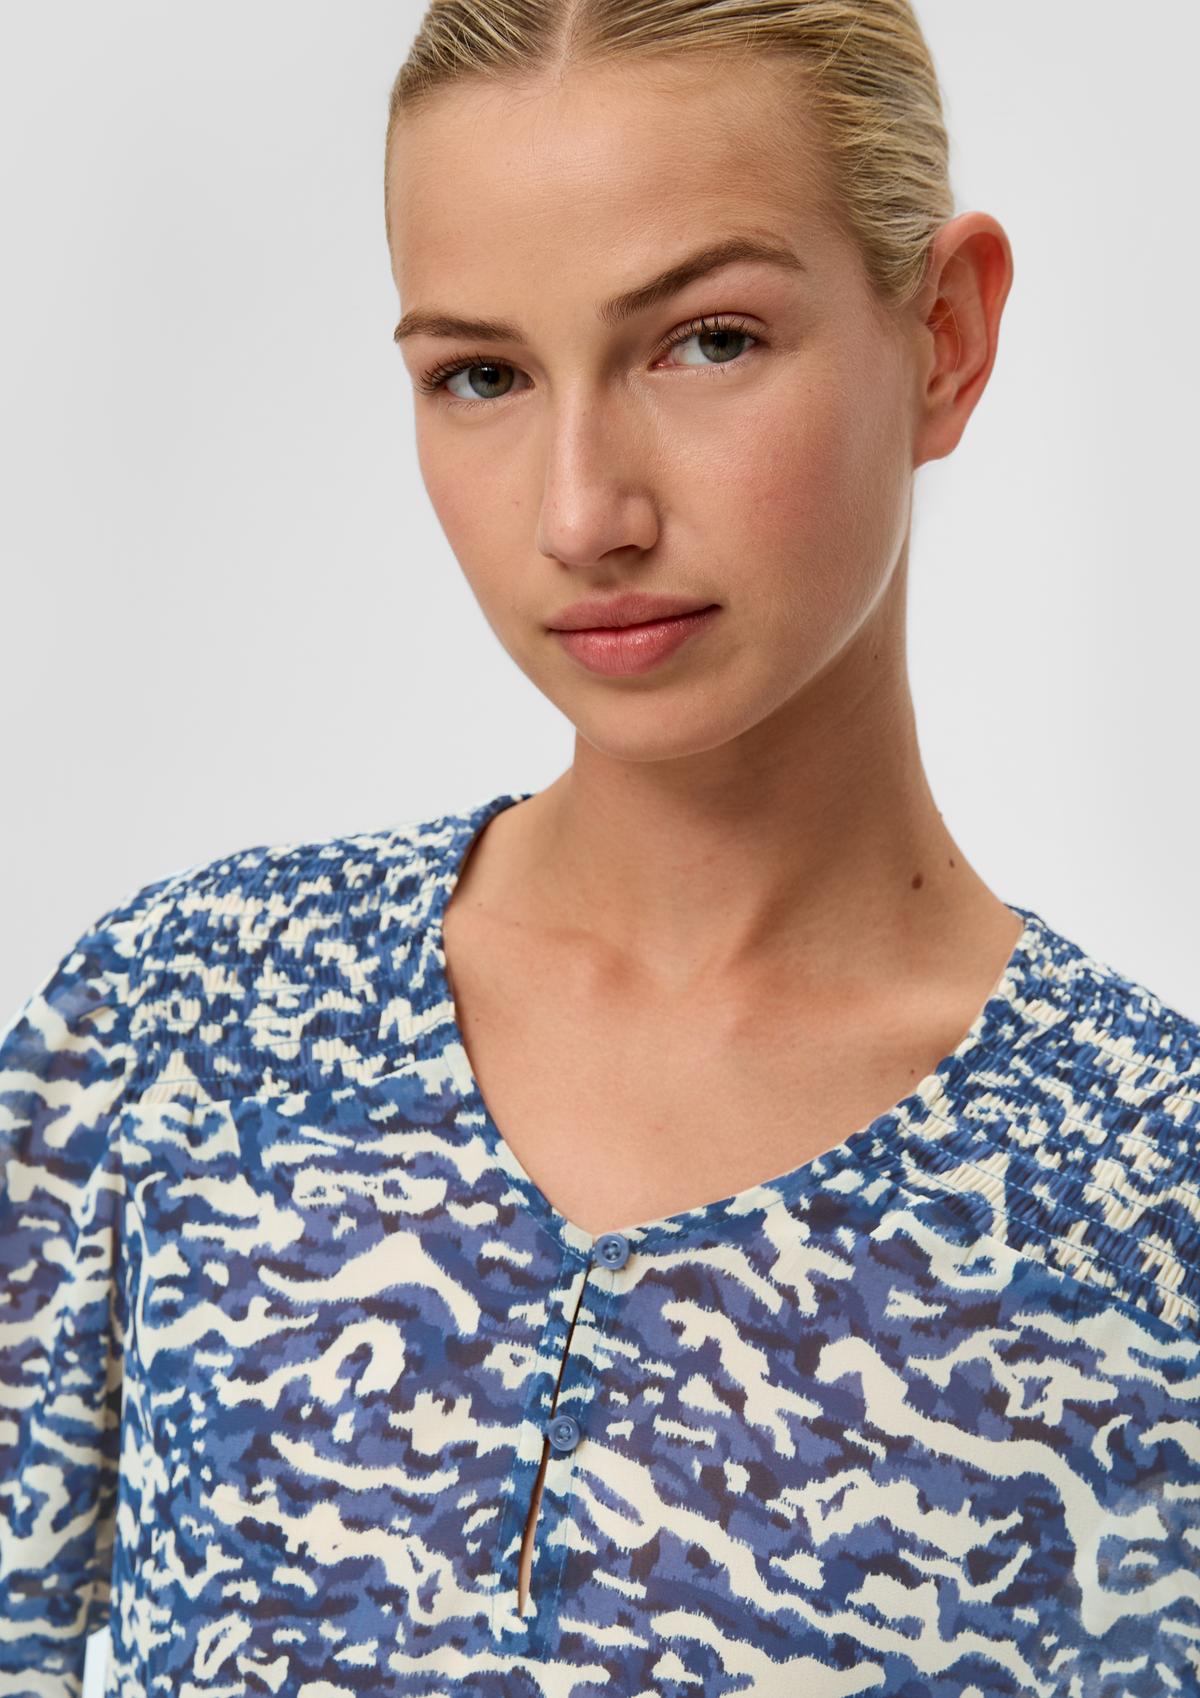 s.Oliver Chiffonbluse mit Allover-Print